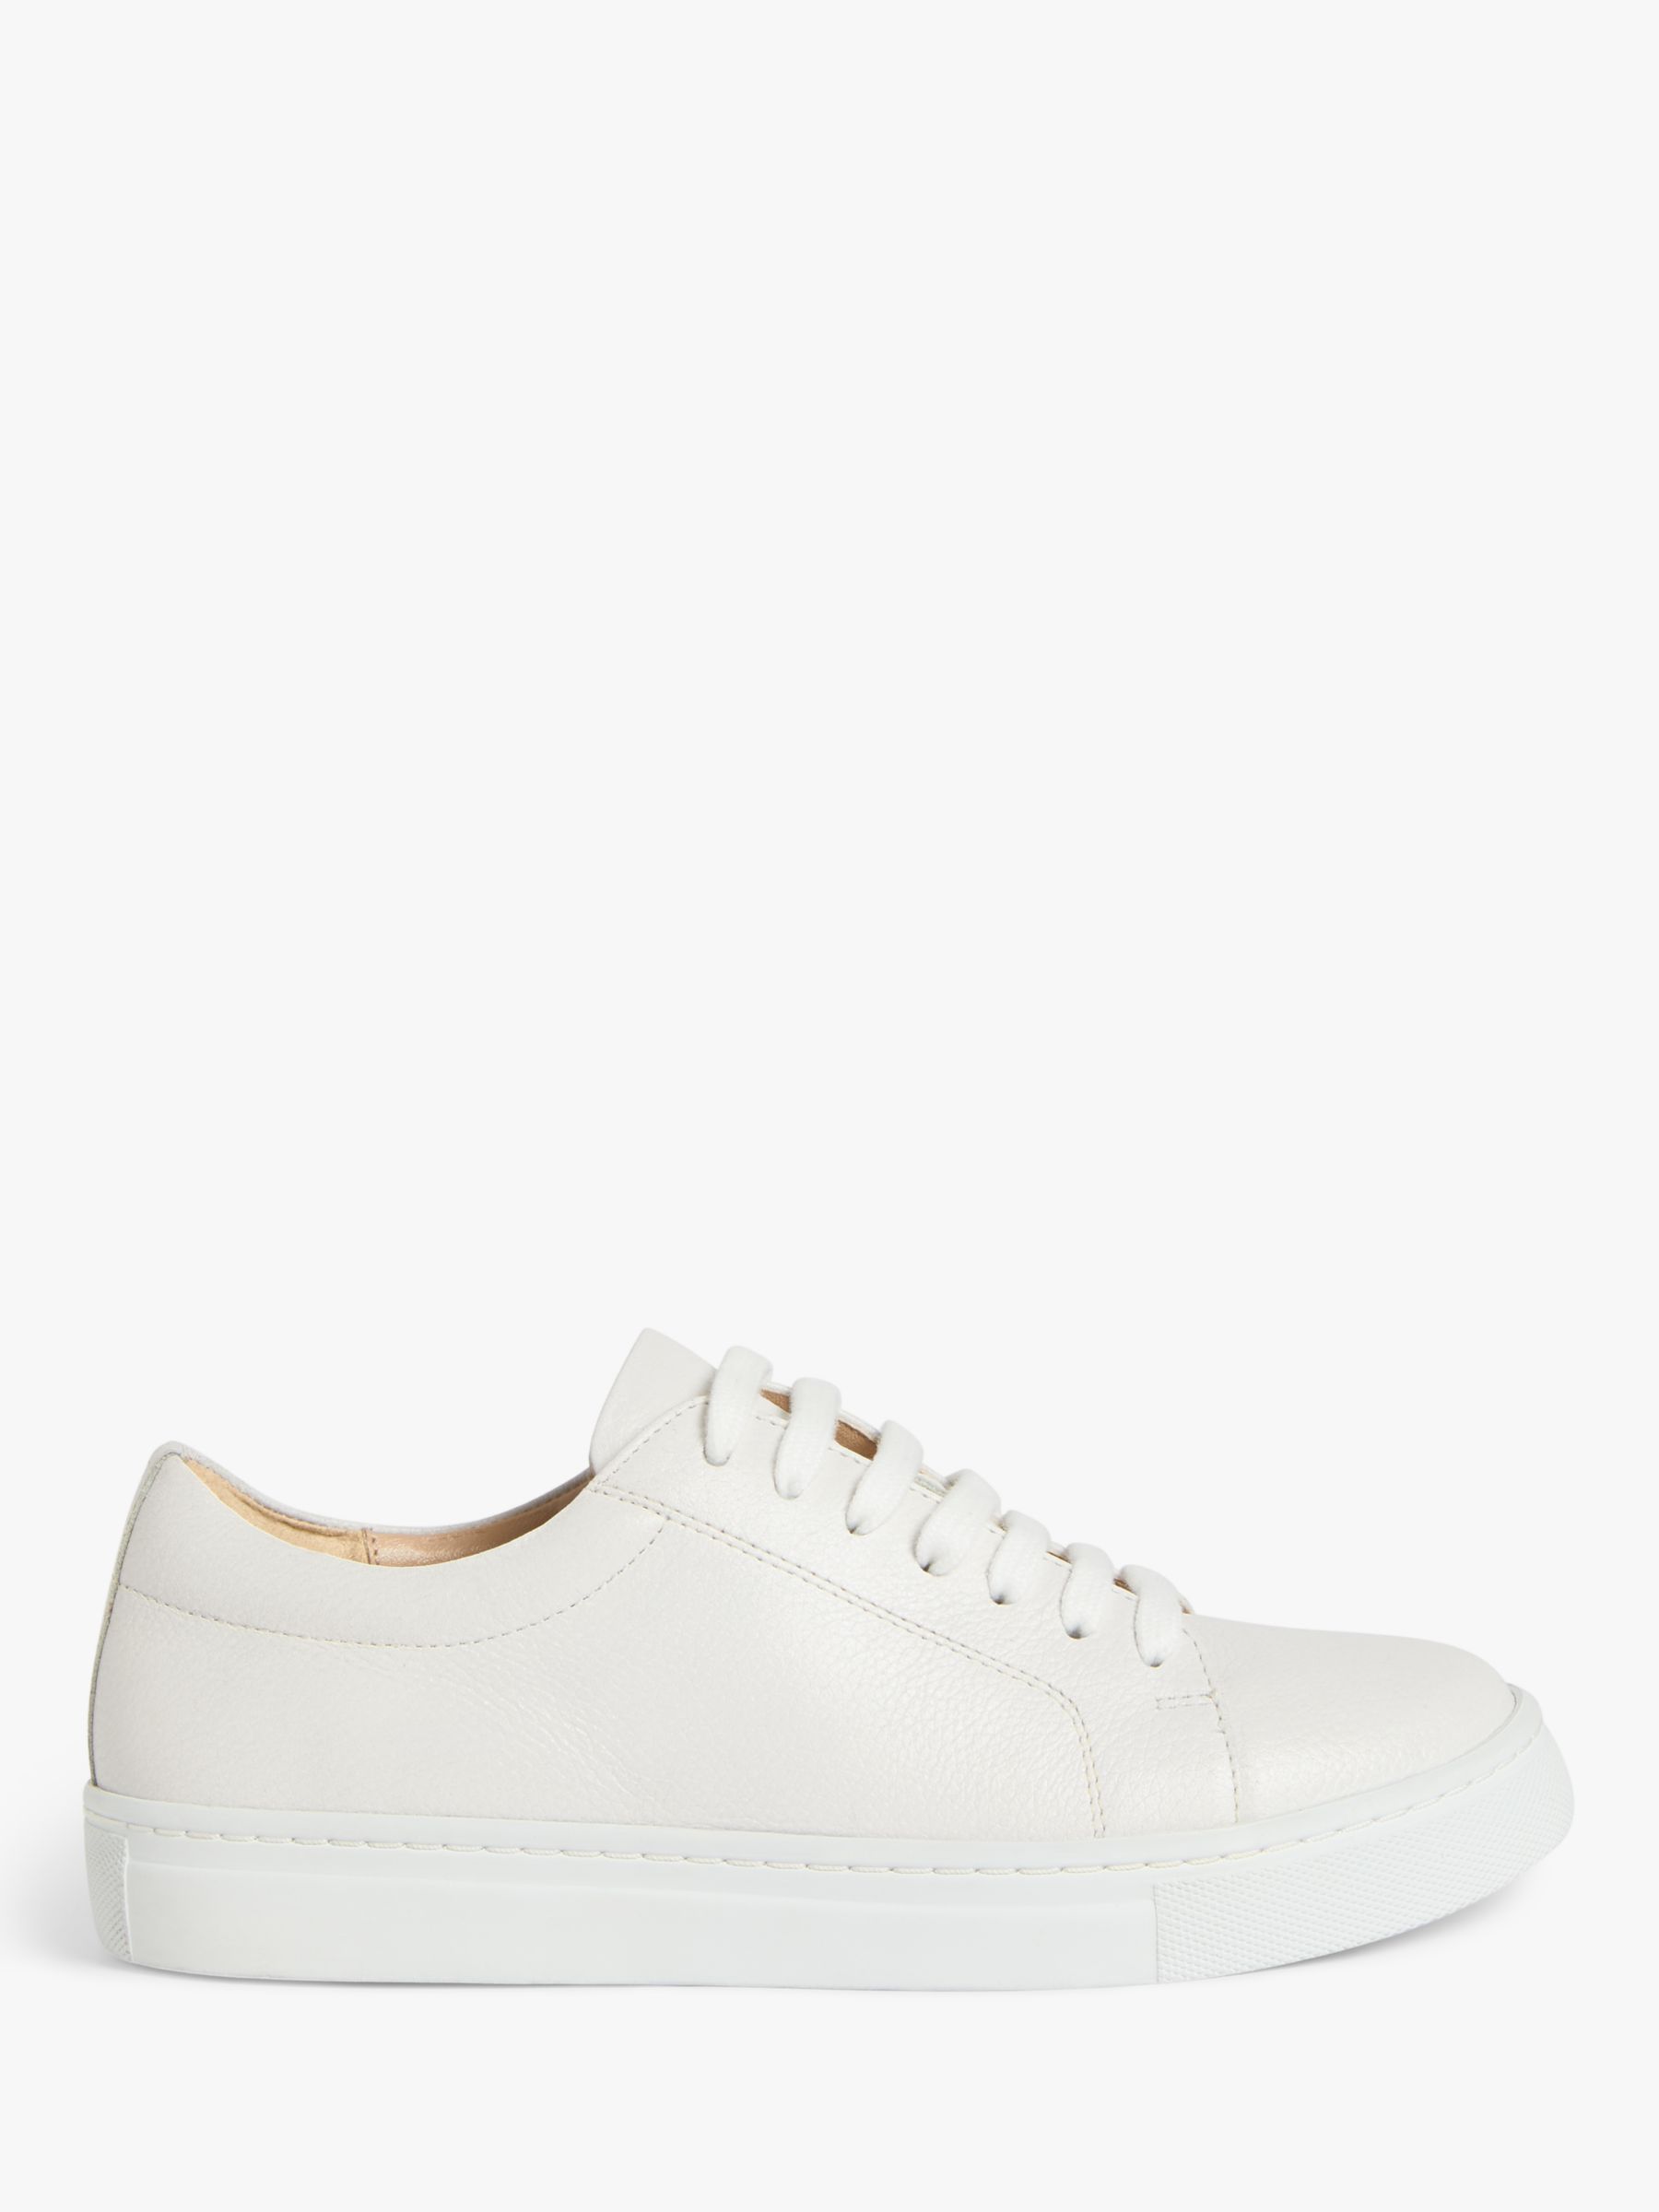 White Trainers To Wear With Dresses | John Lewis & Partners